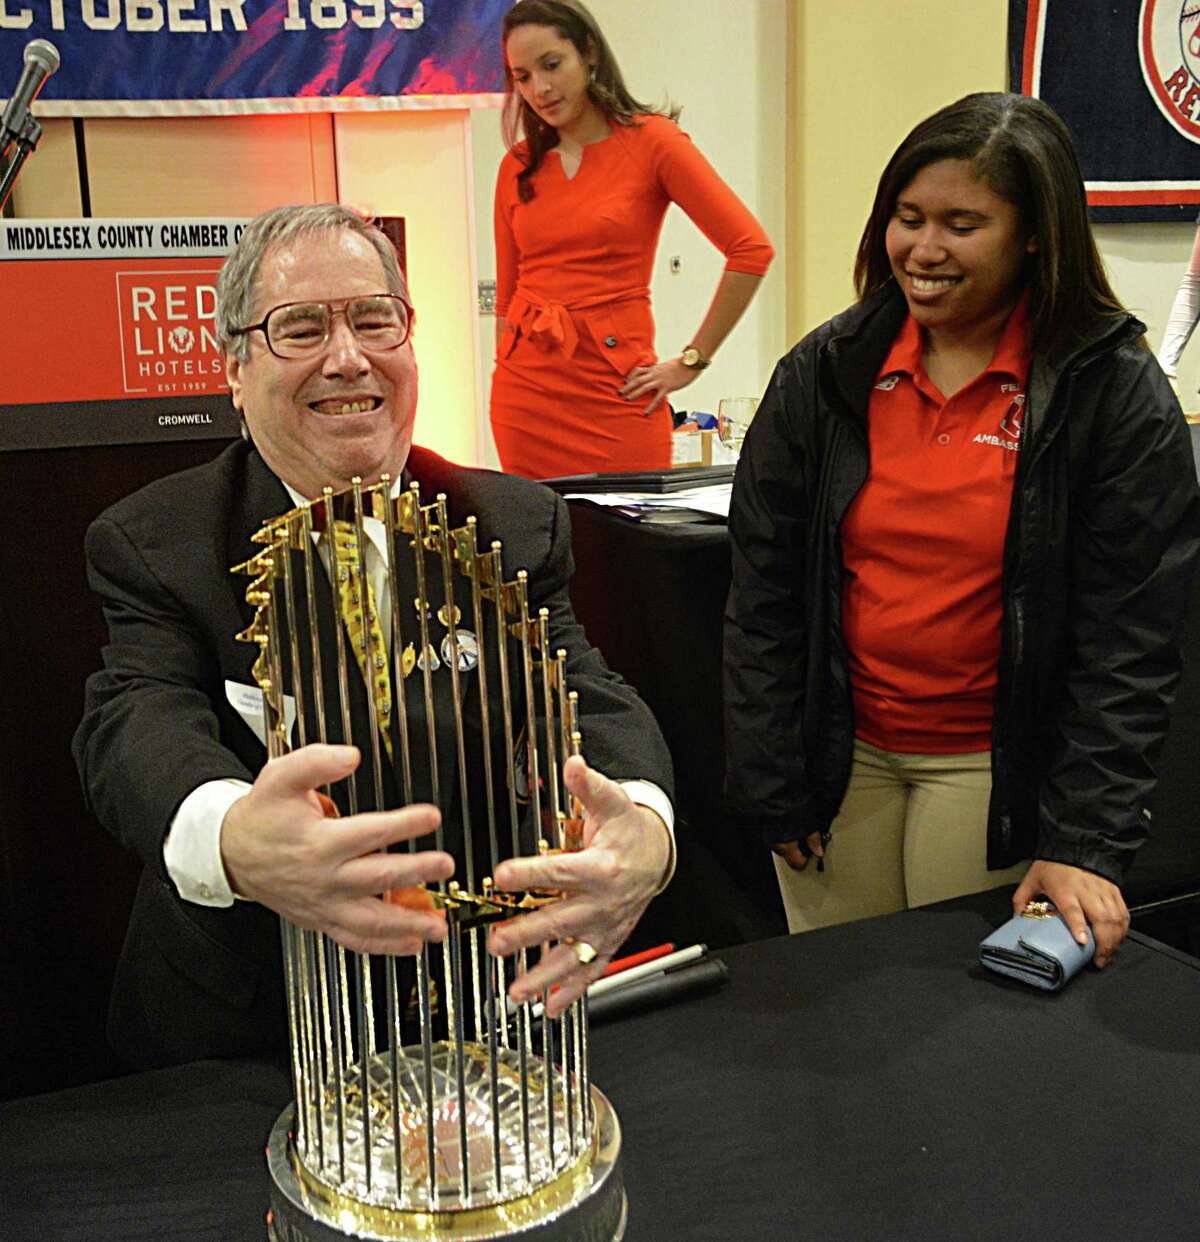 Longtime Middletown Lions Club member Marty Knight was honored at the chamber’s member breakfast Friday in Cromwell. Knight, shown here touching the Boston Red Sox World Series trophy (something no others were allowed to do) advocates for the blind in Middletown and statewide.